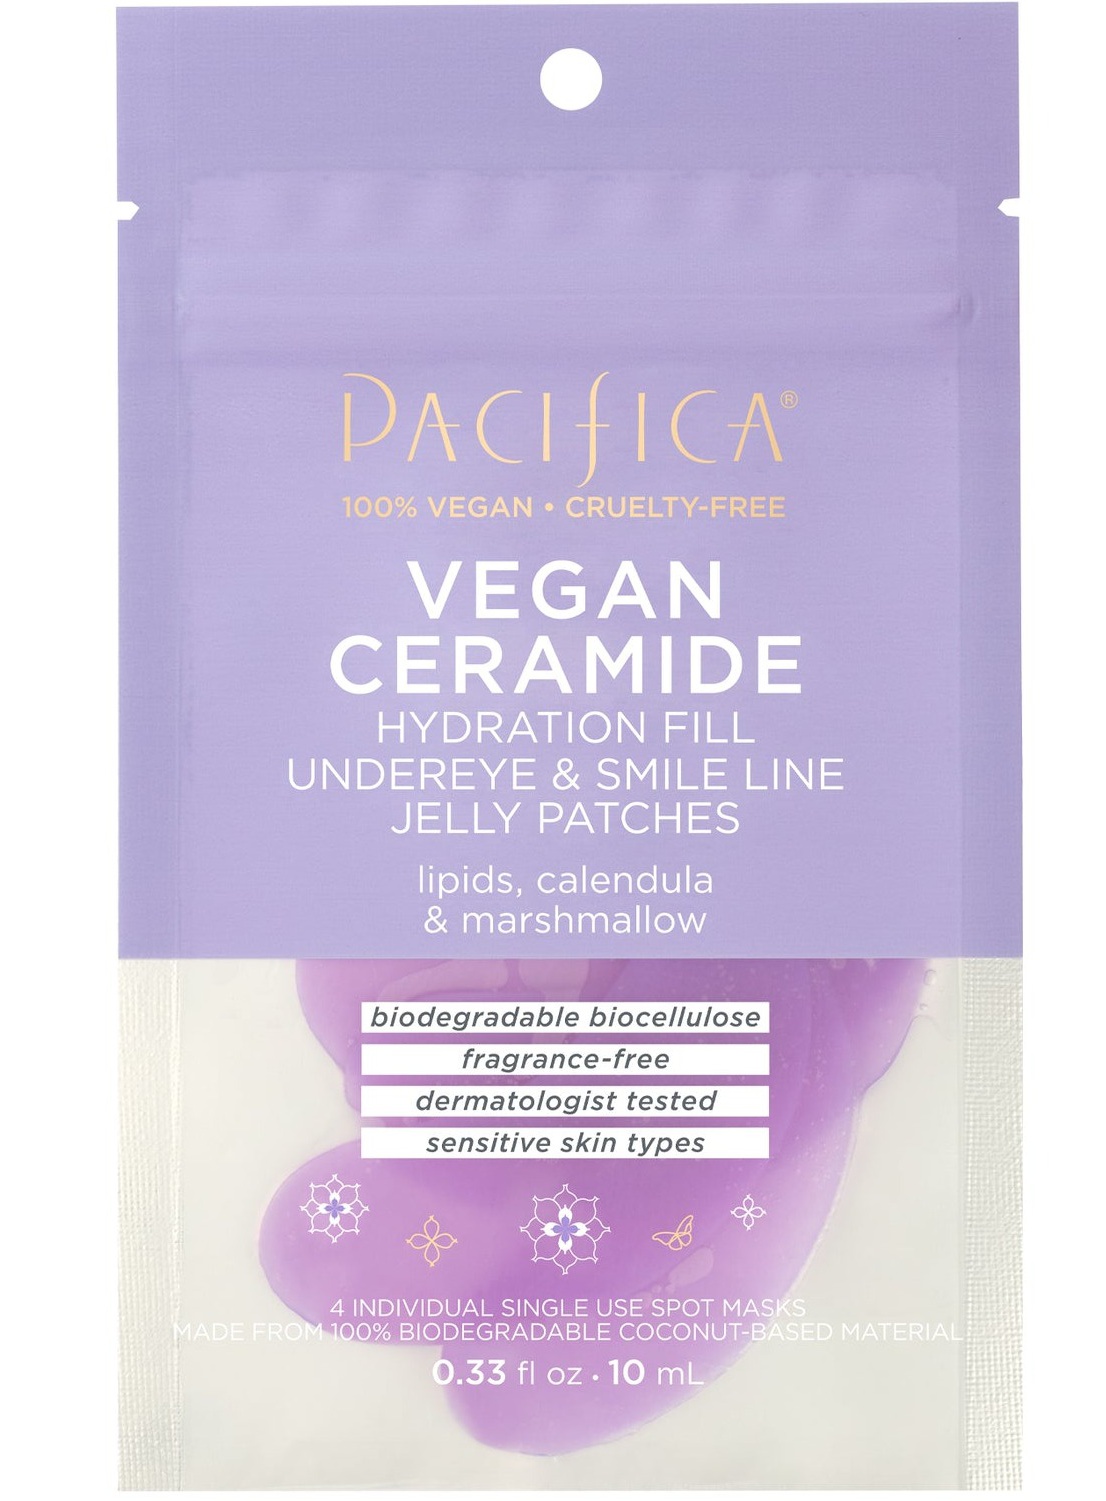 Pacifica Vegan Ceramide Hydration Under Eye & Smile Line Jelly Patches